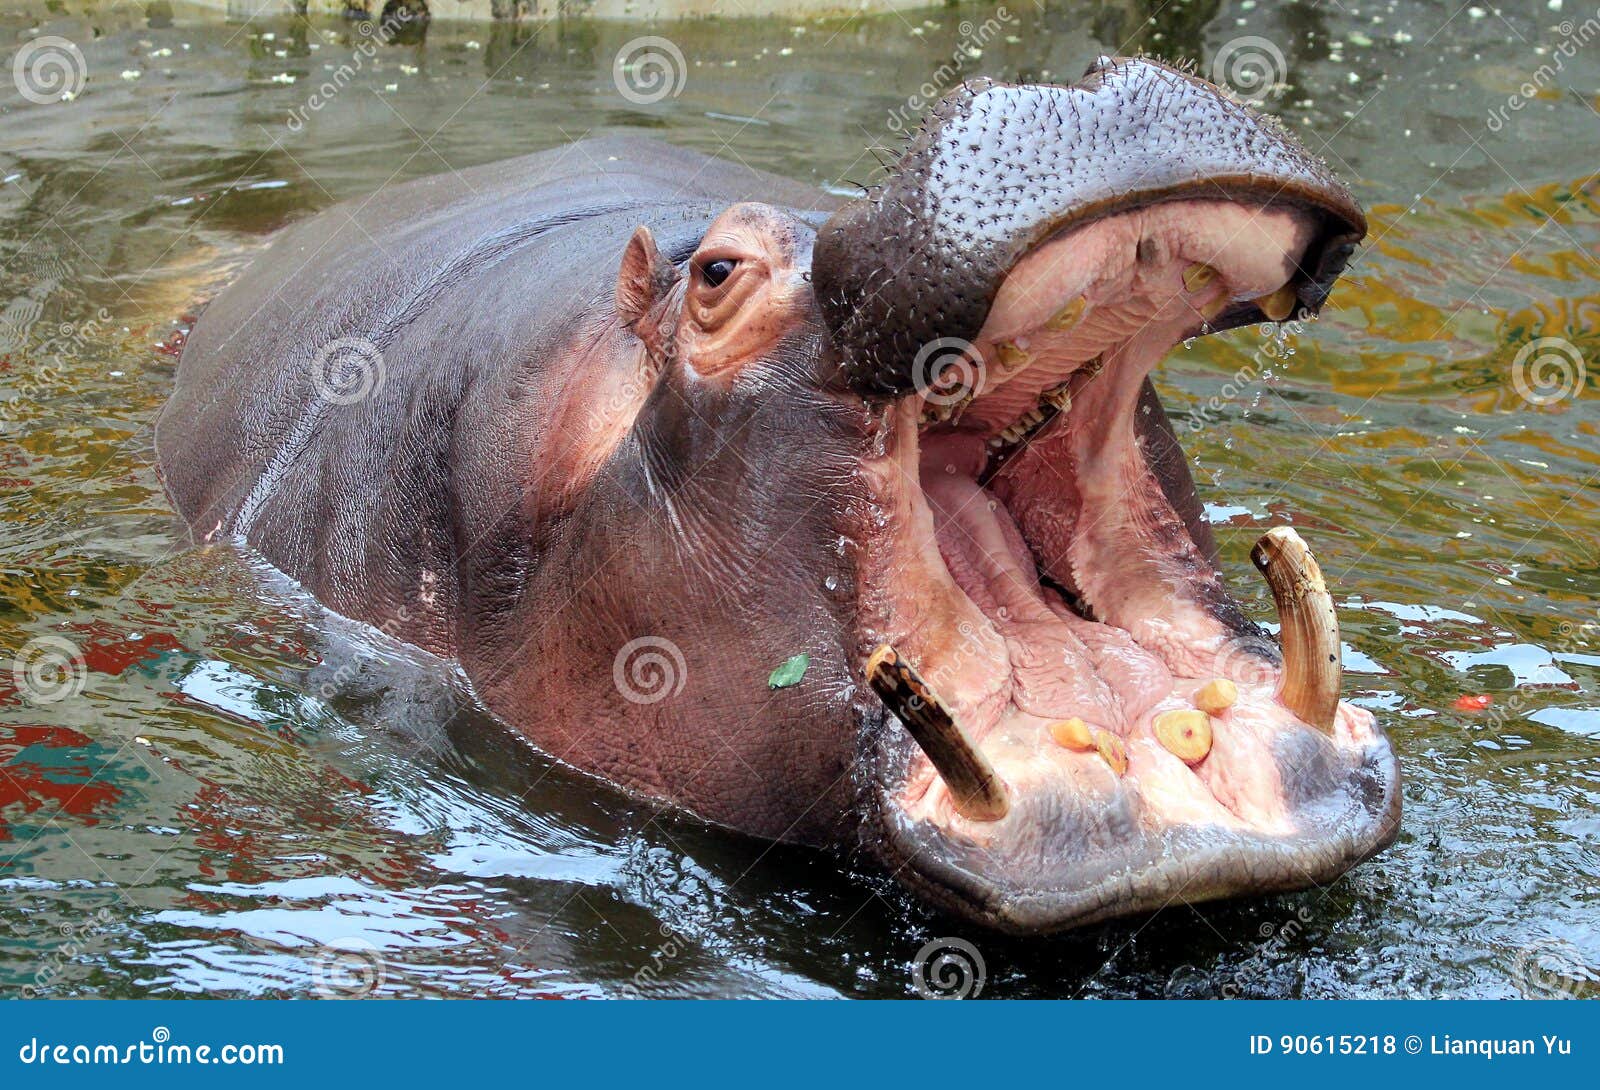 Hippo open the big mouth stock photo. Image of angola - 90615218